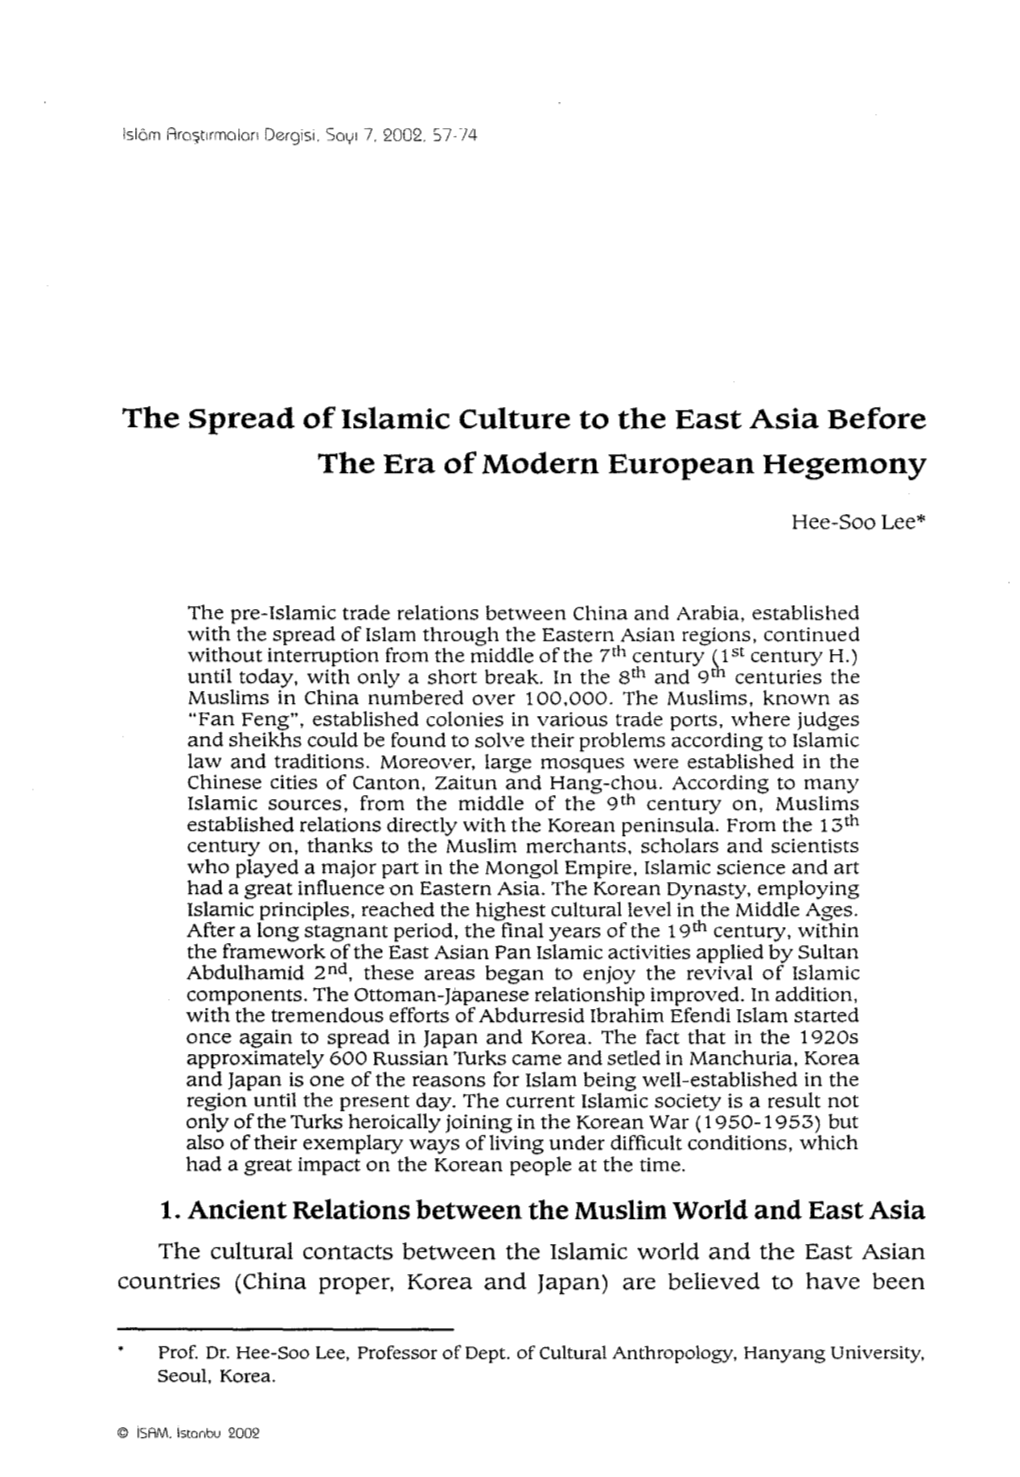 The Spread of Islamic Culture to the East Asia Before the Era of Modern European Hegemony